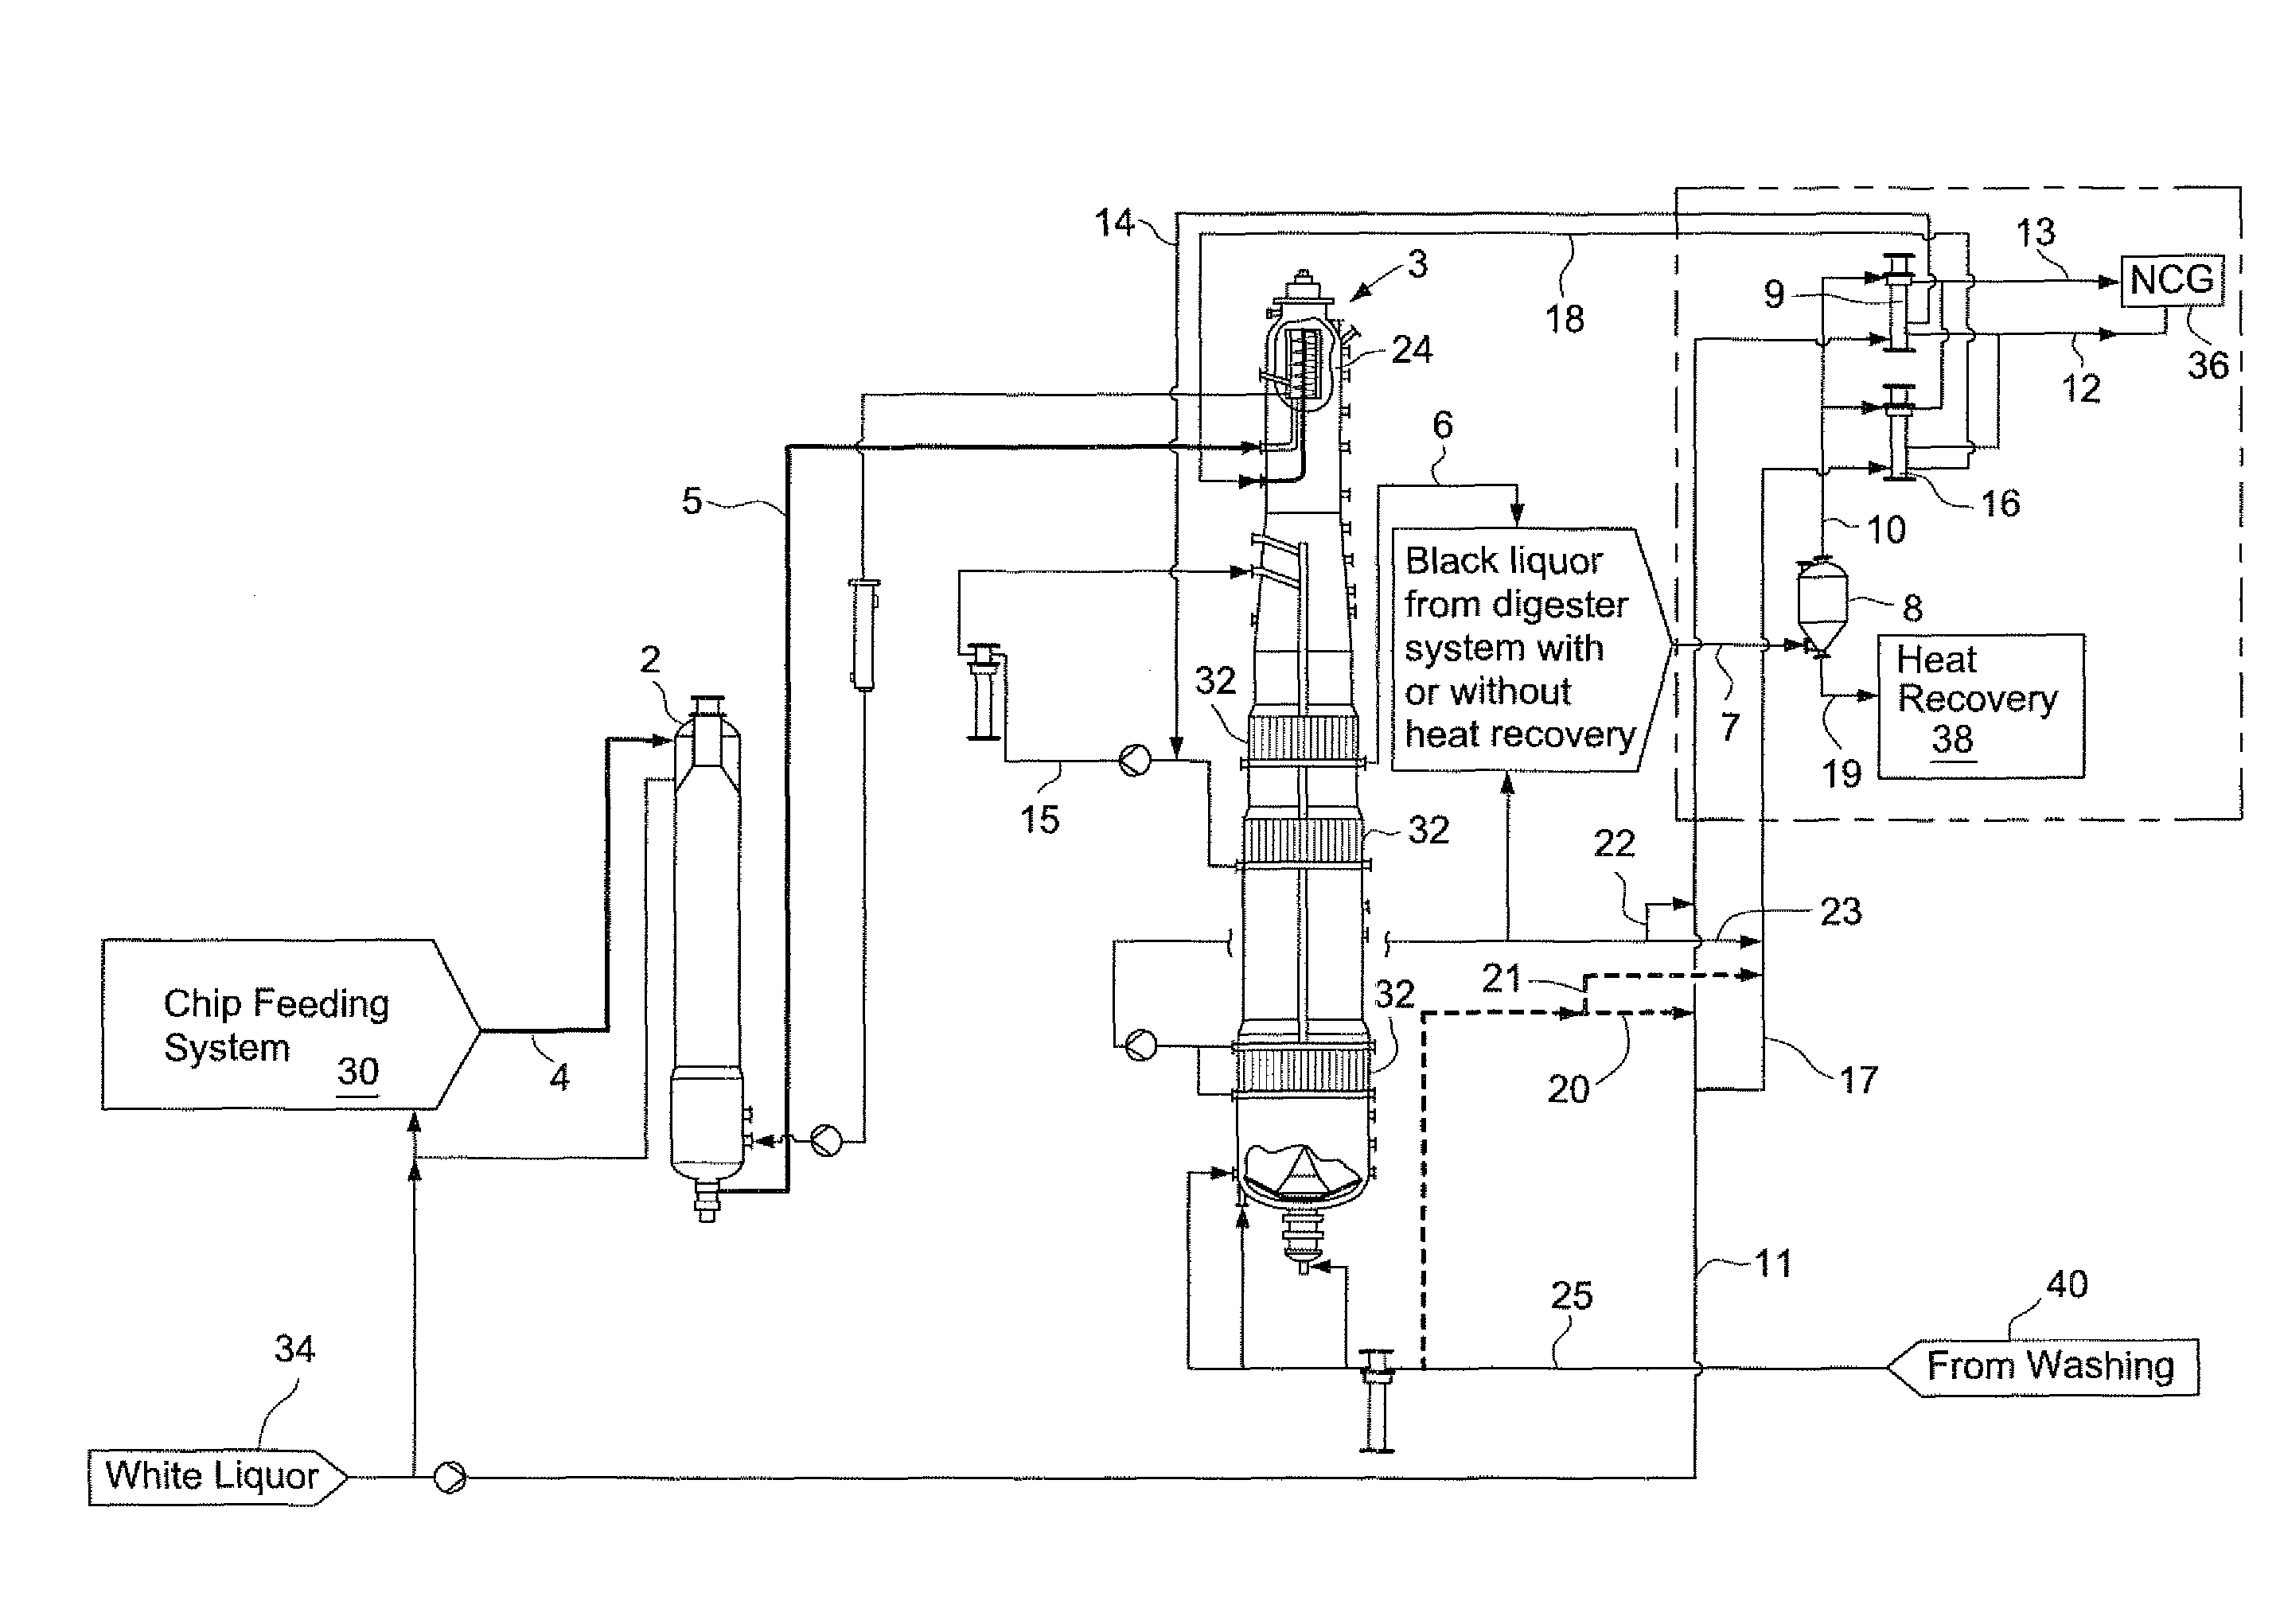 Heat recovery from spent cooking liquor in a digester plant of a chemical pulp mill